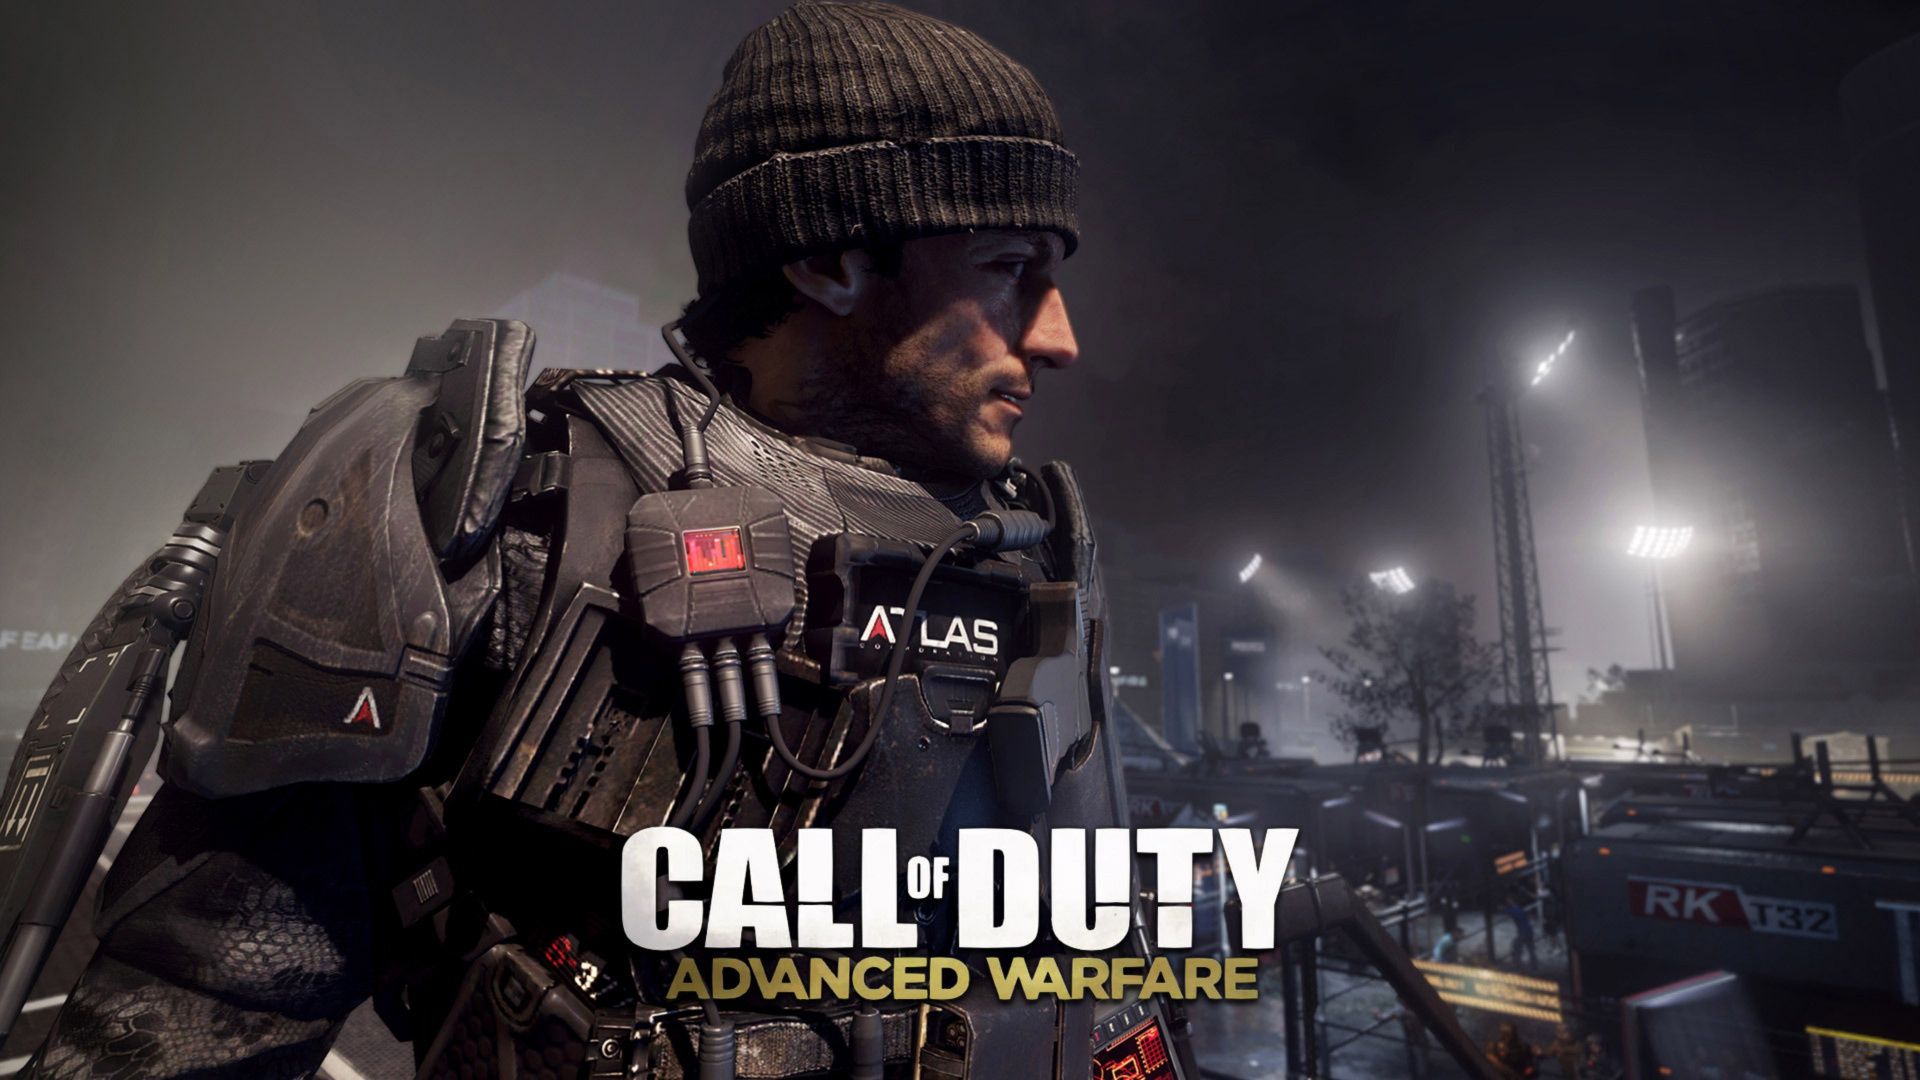 Call of Duty Advanced Warfare, Sledgehammer Games, Multiplayer Video Game, pc Game, Soldier. Wallpaper in 1920x1080 Resolution